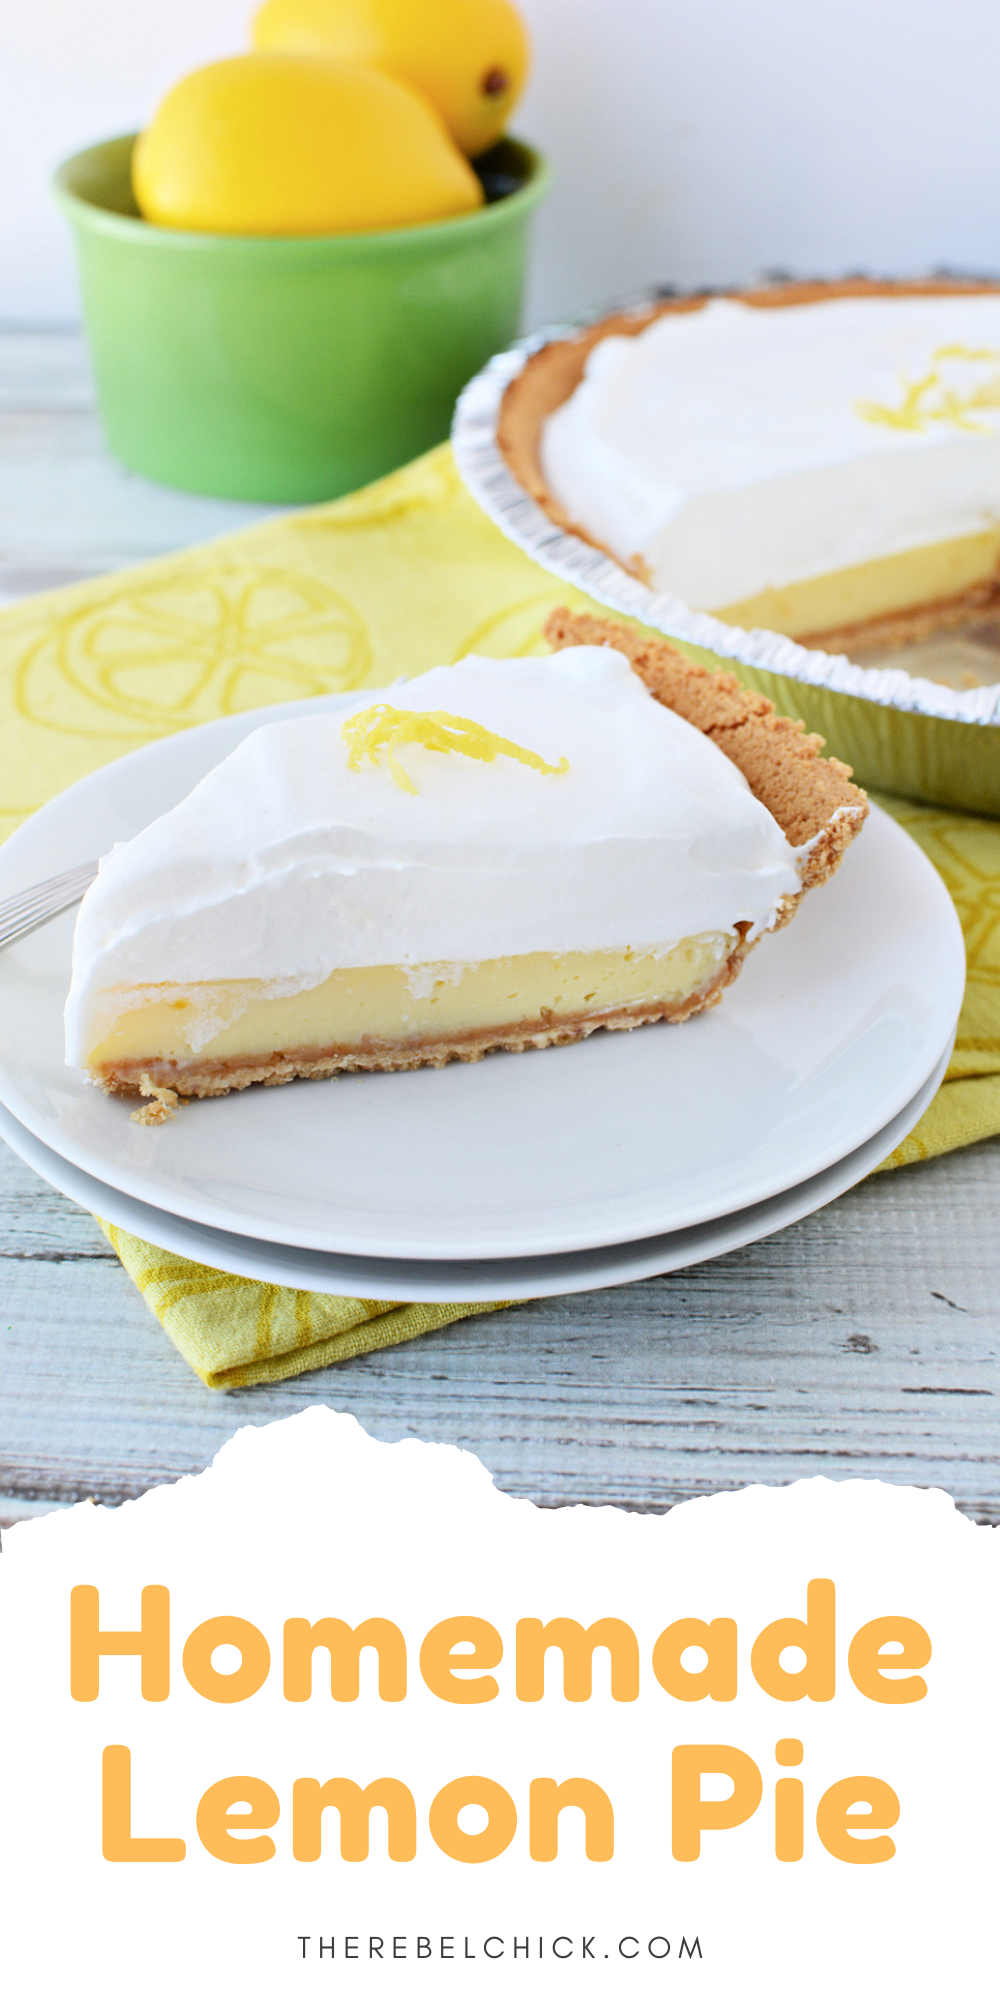 Here is a super simple and tasty Easy Homemade Lemon Pie Recipe. I swear anyone can make this! It has very few ingredients and you use a pre-made crust so it's even easier!